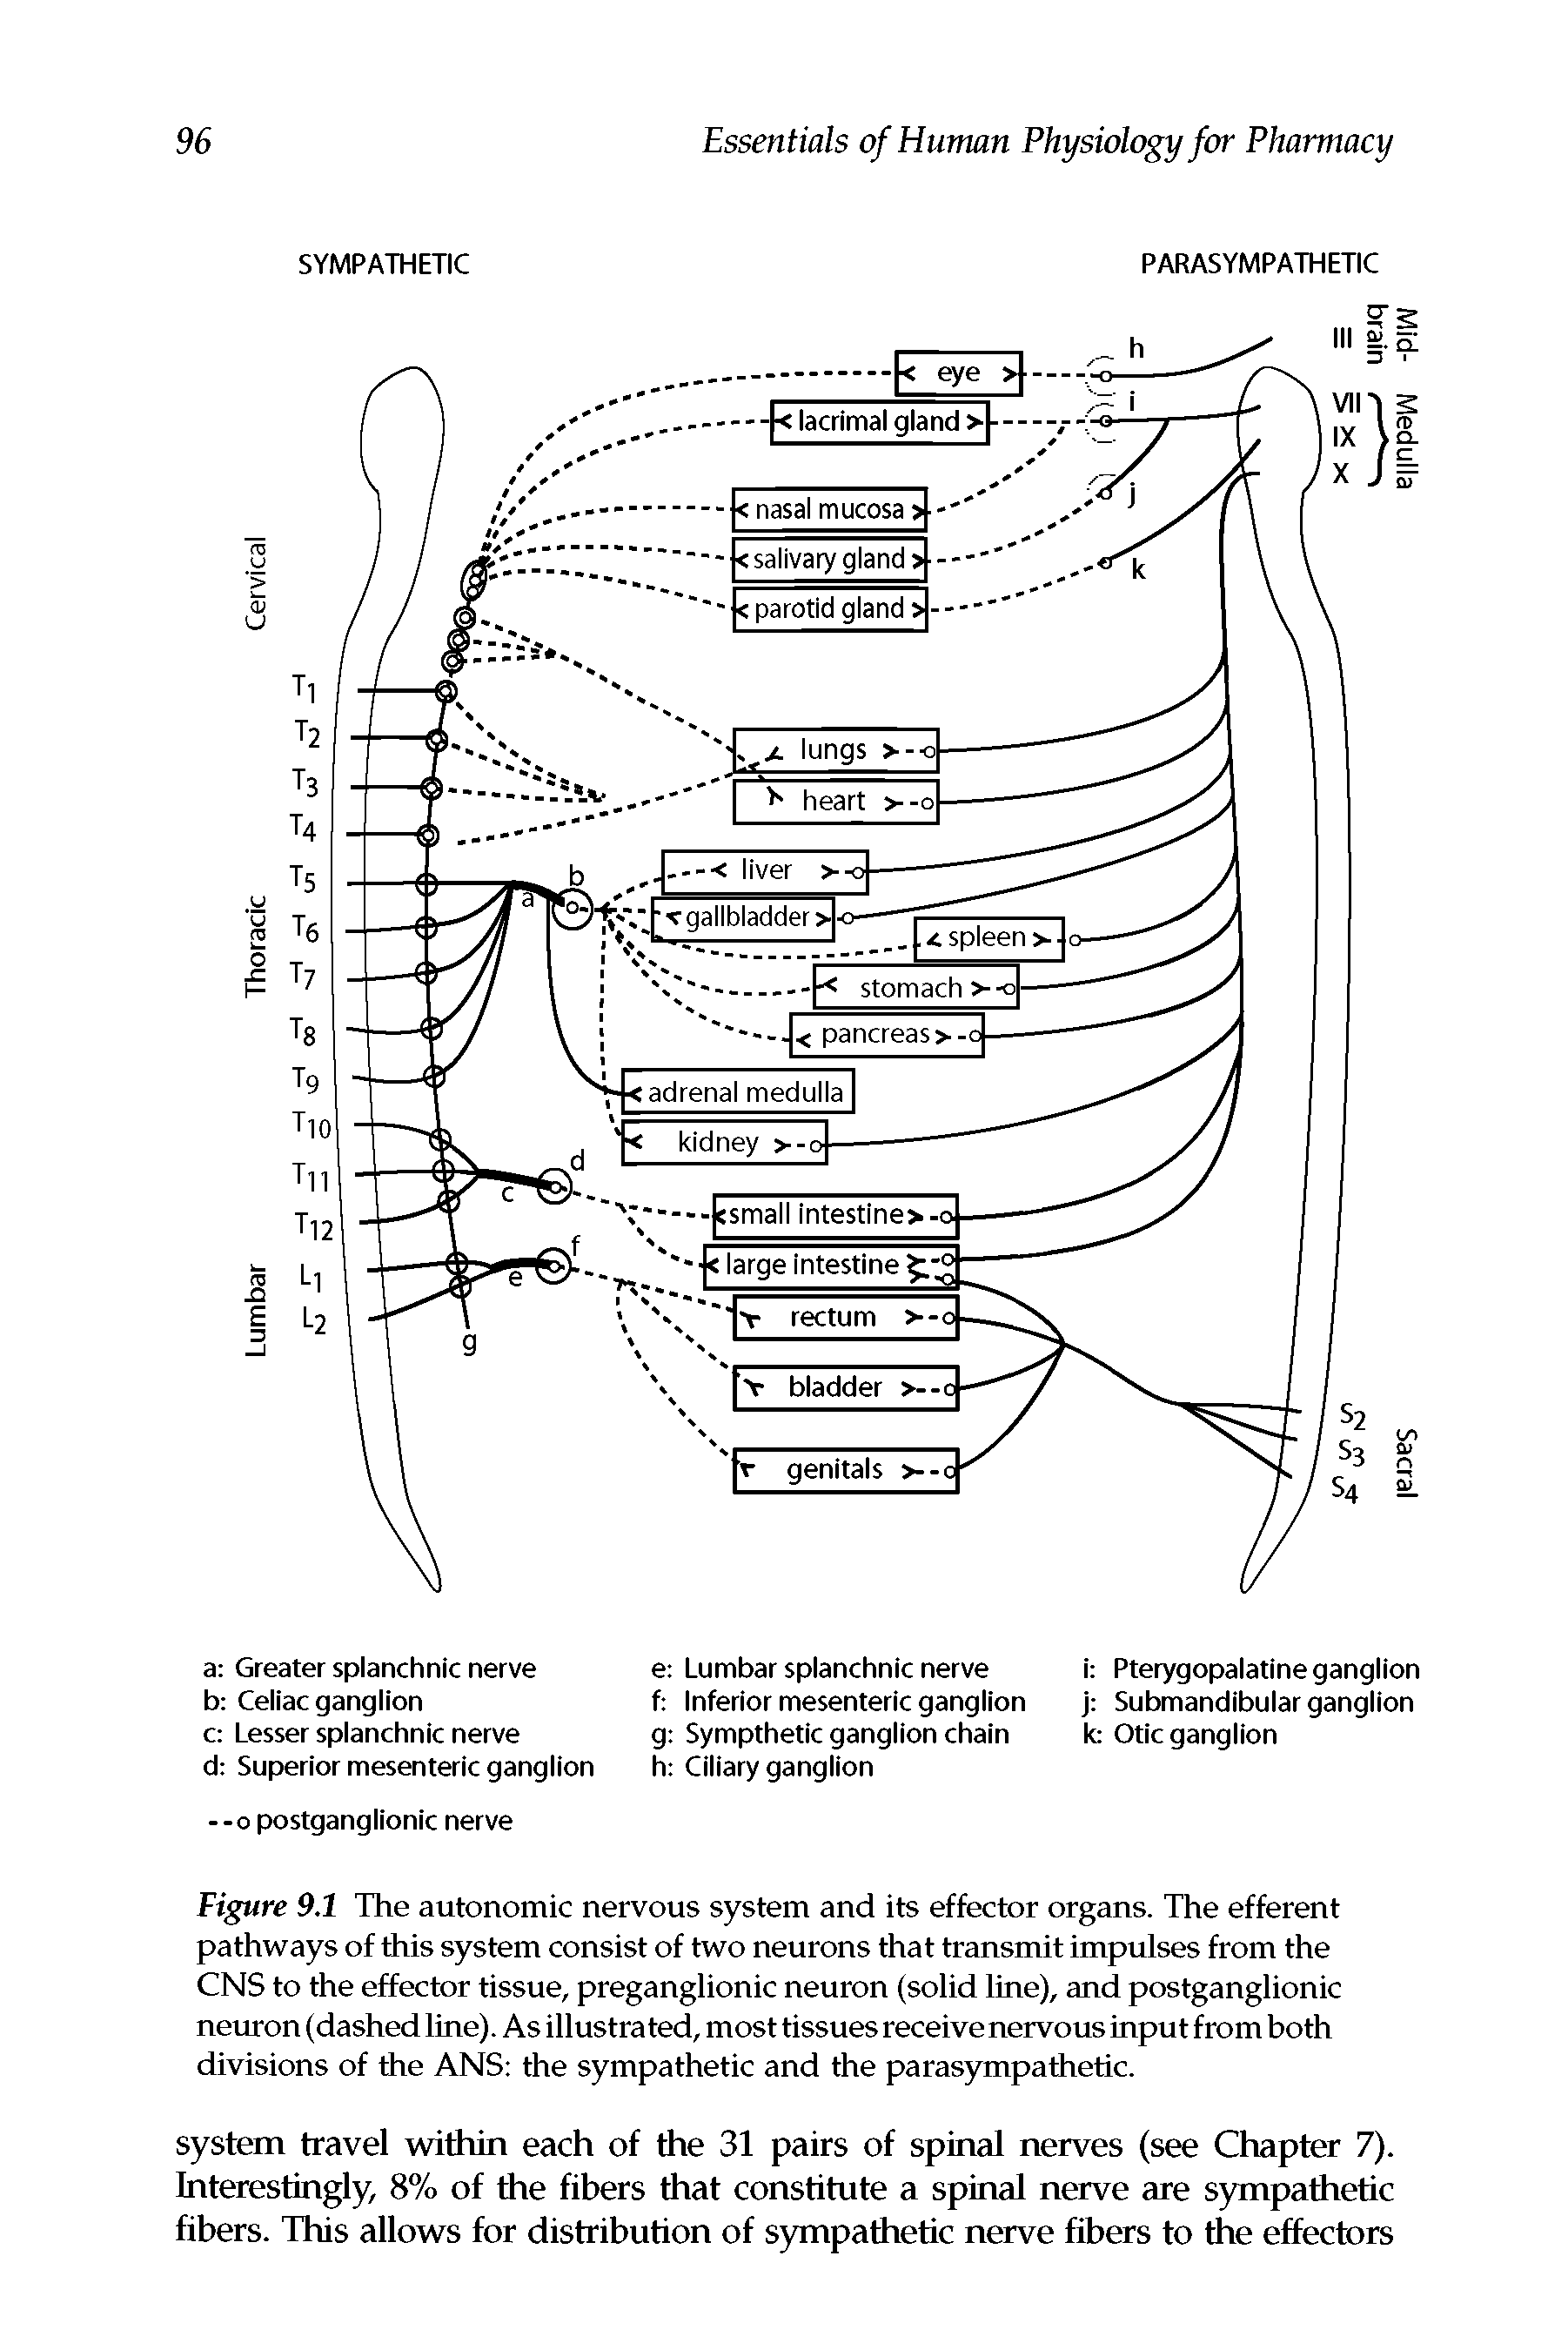 Figure 9.1 The autonomic nervous system and its effector organs. The efferent pathways of this system consist of two neurons that transmit impulses from the CNS to the effector tissue, preganglionic neuron (solid line), and postganglionic neuron (dashed line). As illustrated, most tissues receive nervous input from both divisions of the ANS the sympathetic and the parasympathetic.